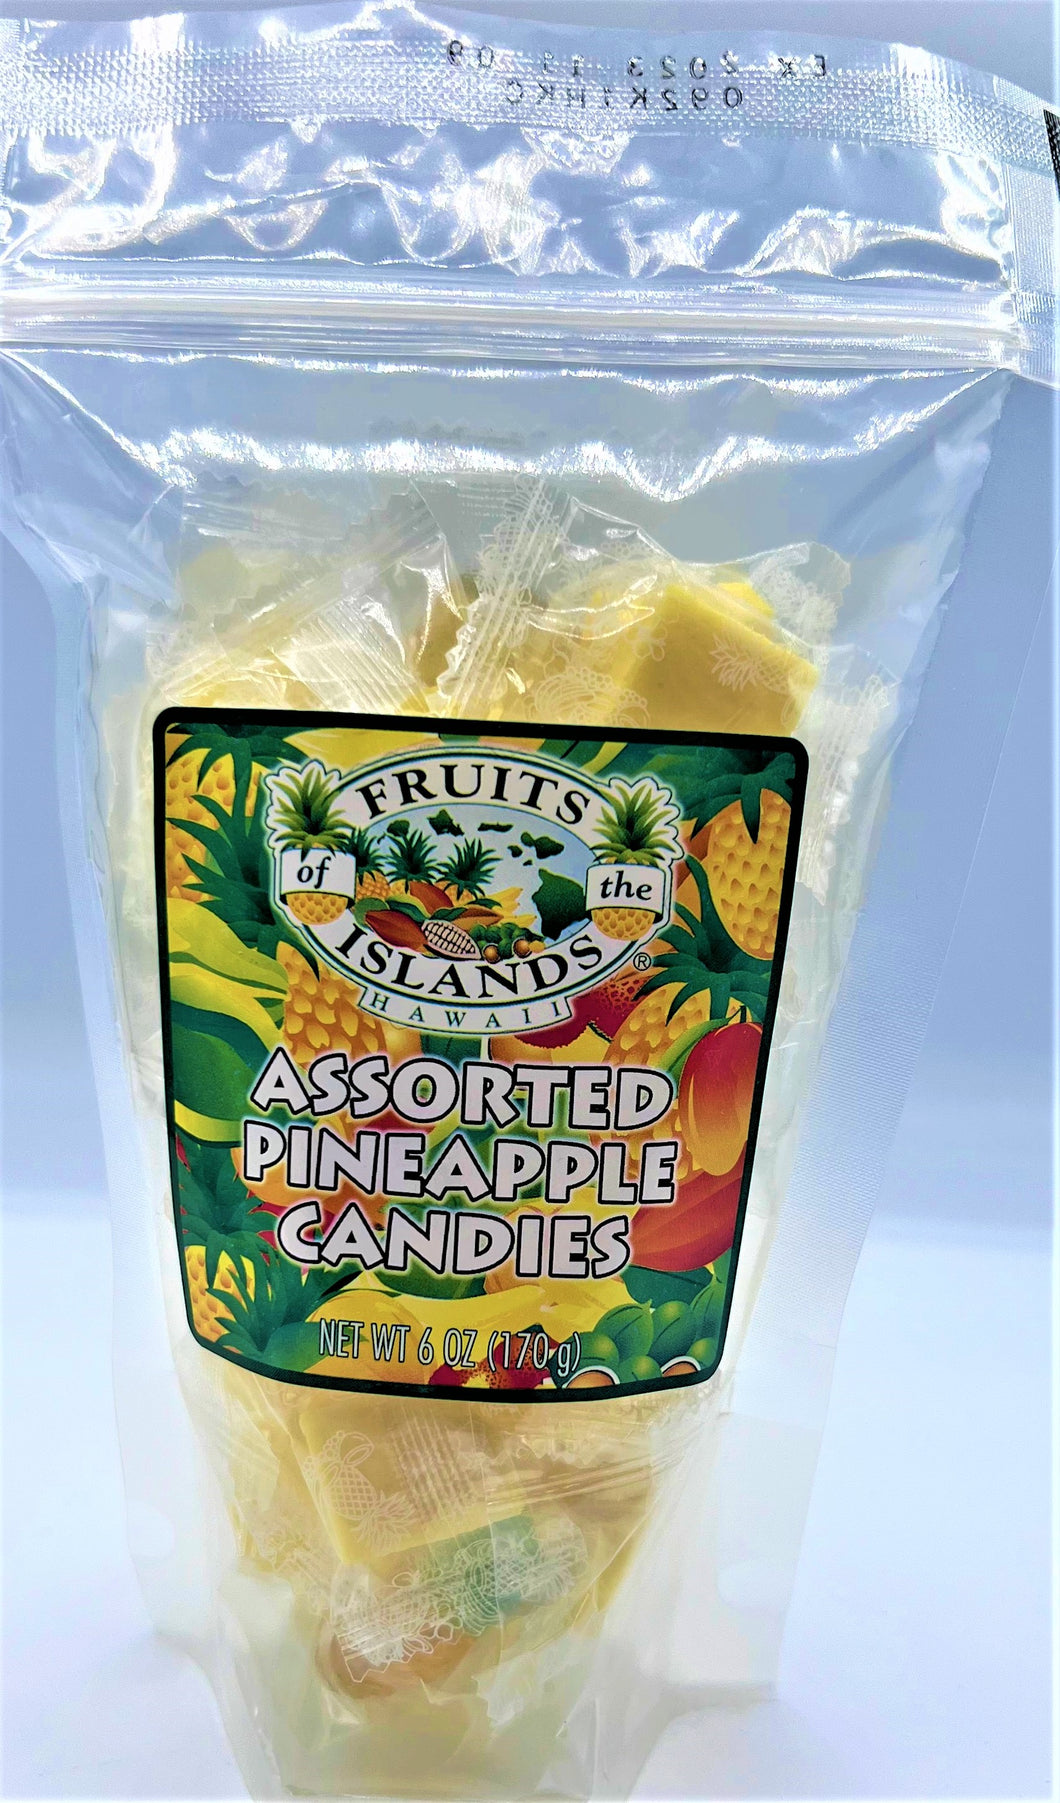 Assorted Pineapple Candies Bag 6oz (170g)